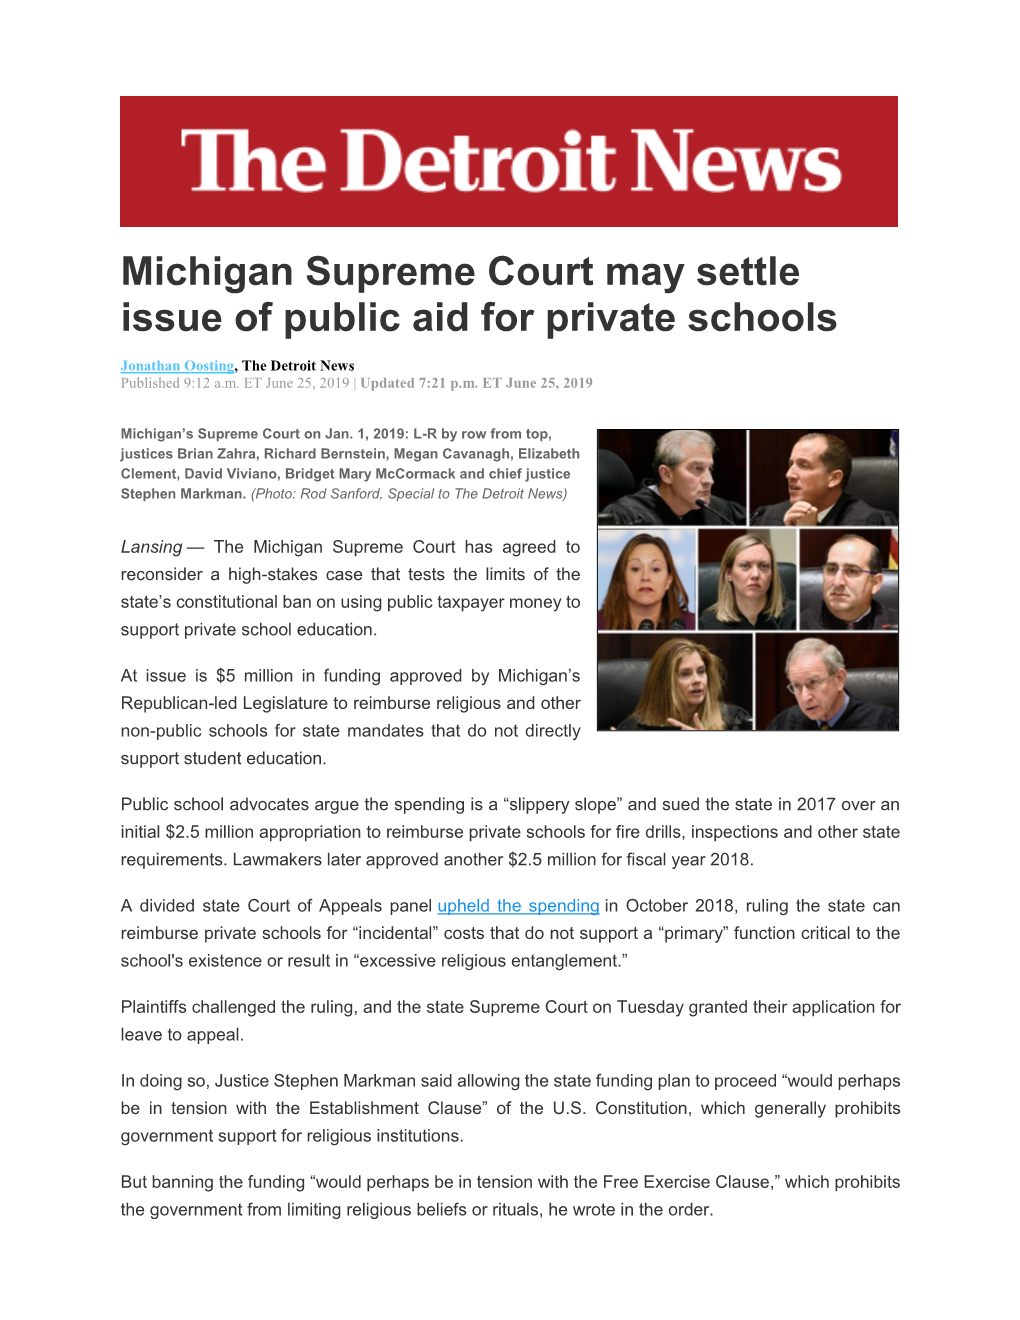 Michigan Supreme Court May Settle Issue of Public Aid for Private Schools